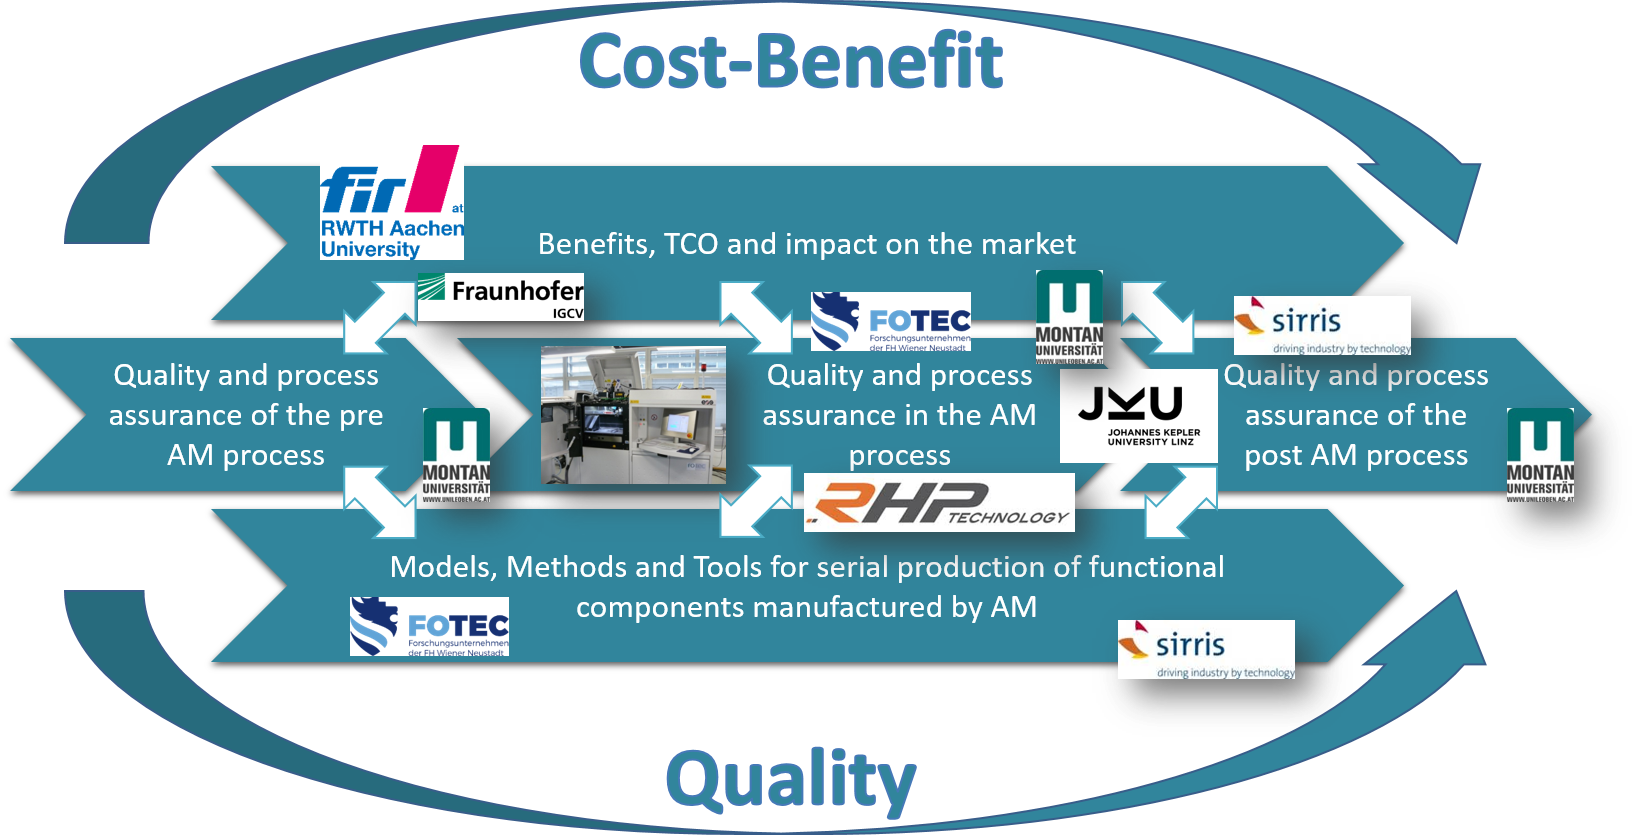 The Cost-Benefit Model of Additive Manufacturing in Production. Image via AM4I.